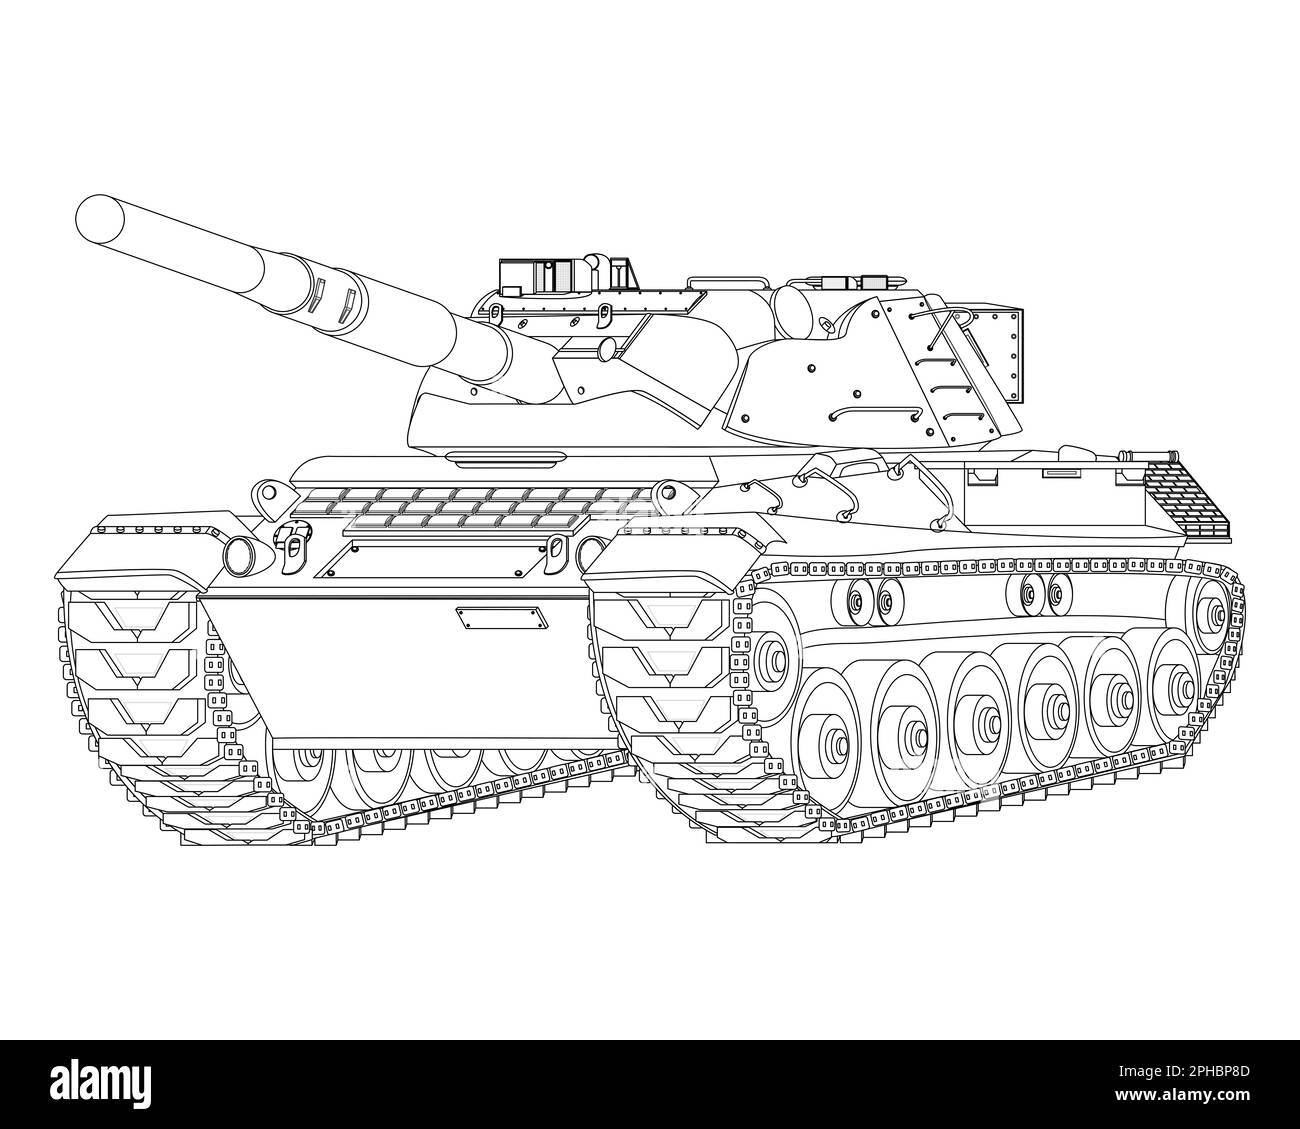 German Leopard I main battle tank Coloring Page. Military vehicle. Illustration isolated on white background. Stock Photo